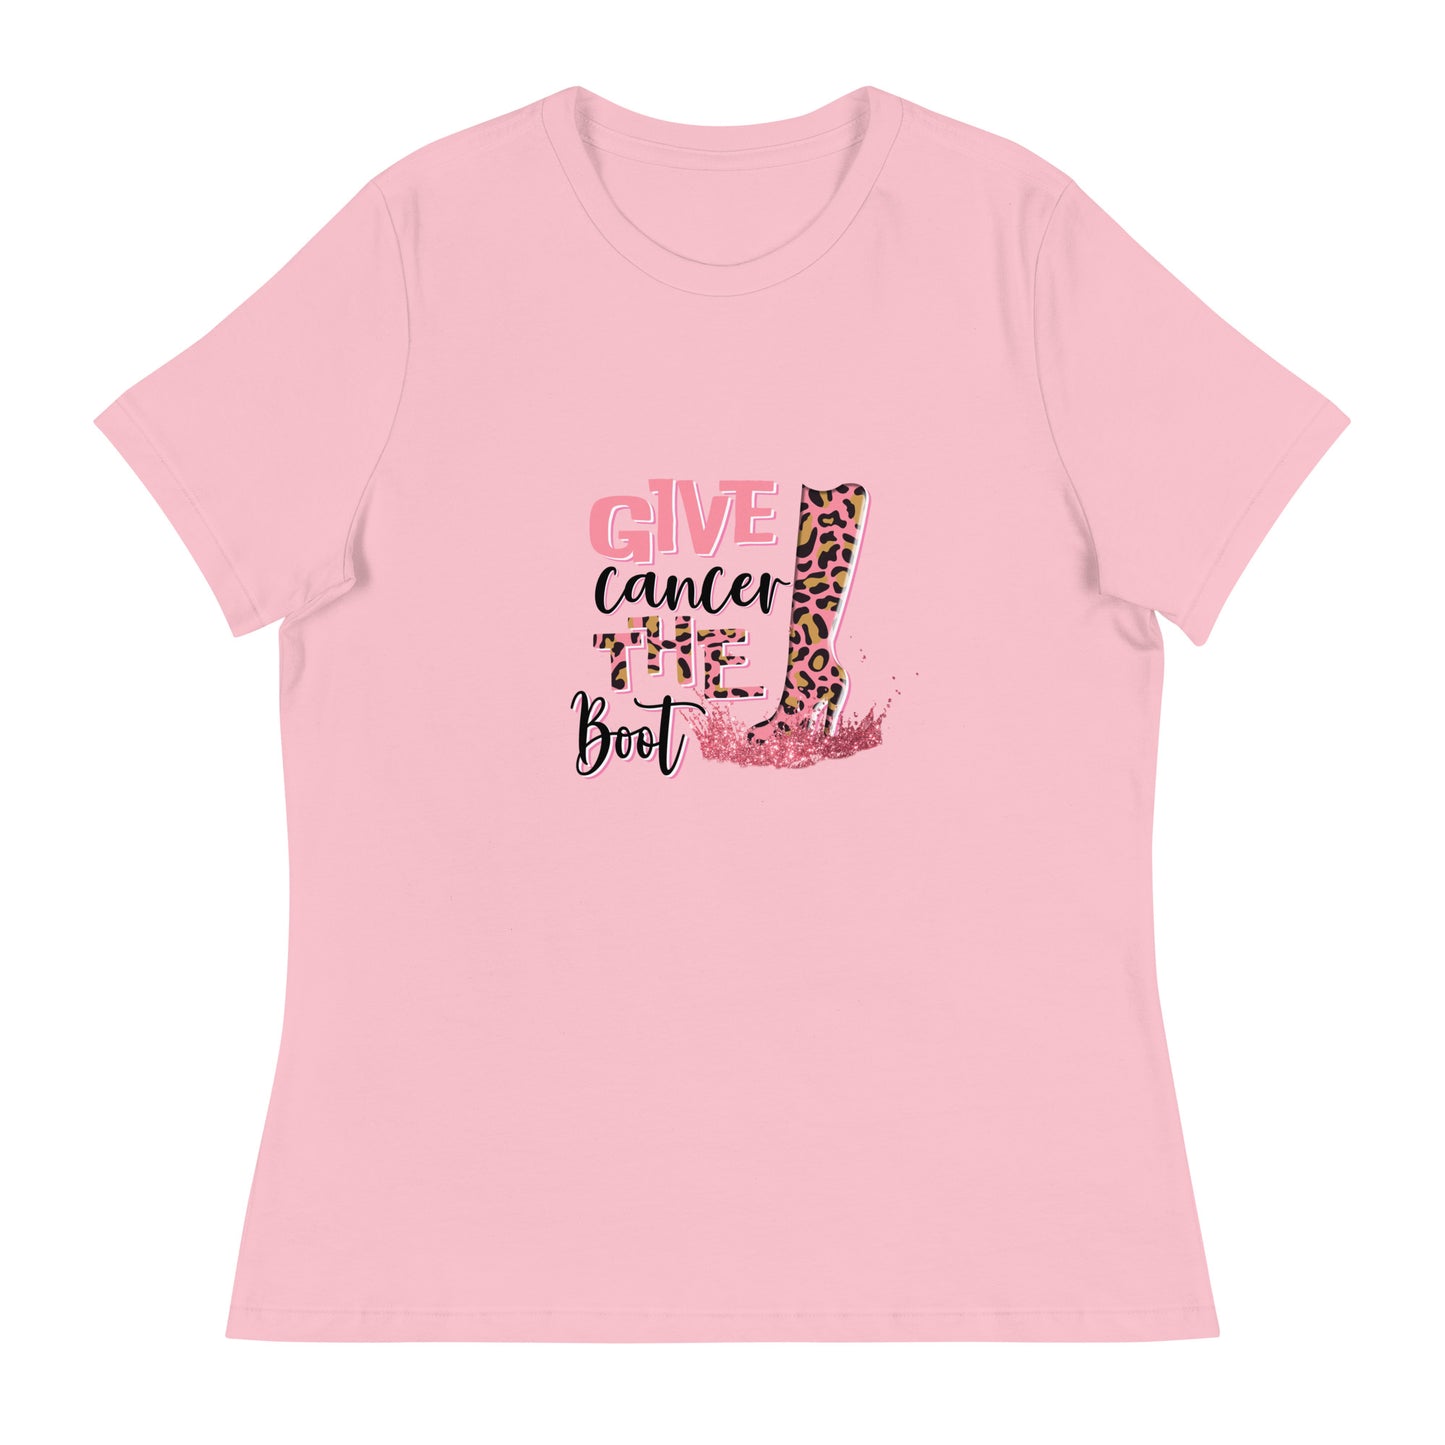 Women's Relaxed T-Shirt-Give-Cancer-A-Boot